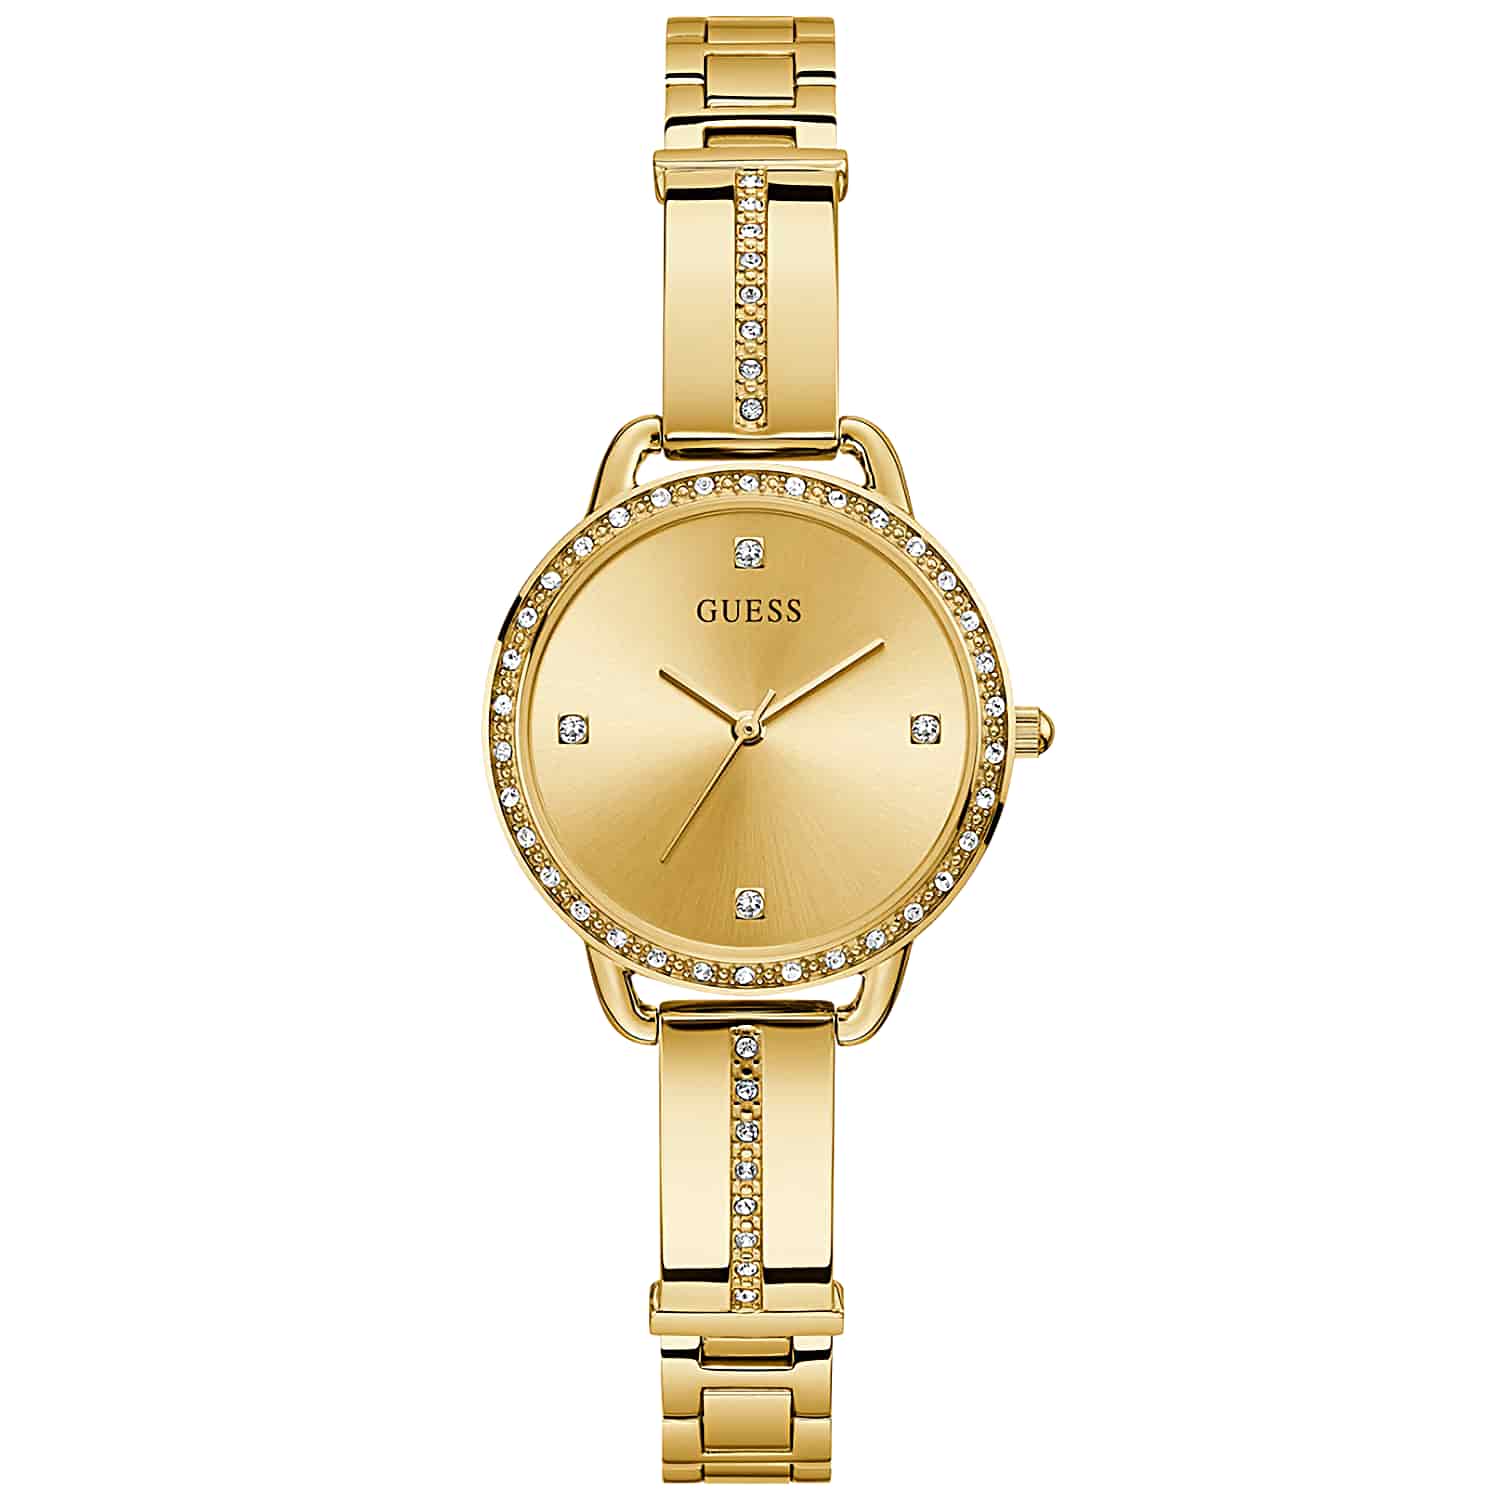 GW0022L2 GUESS Gold Tone Watch. A touch of sparkle on this dressy bangle featuring crystals on the case, bangle and dial.